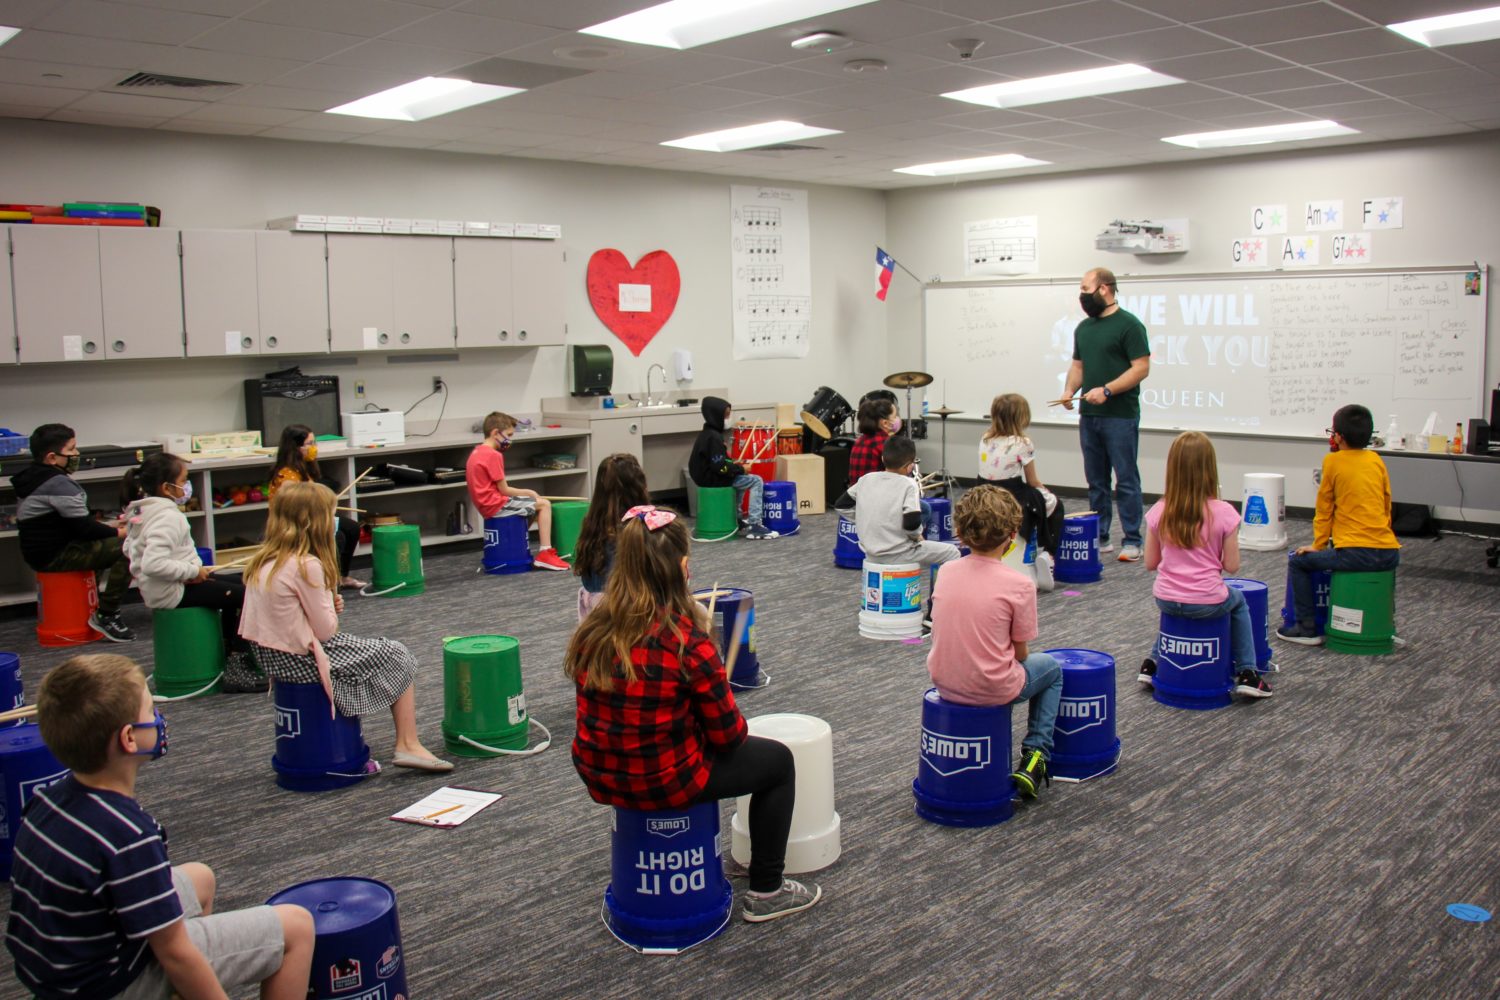 A group of students use buckets as drums in music class.